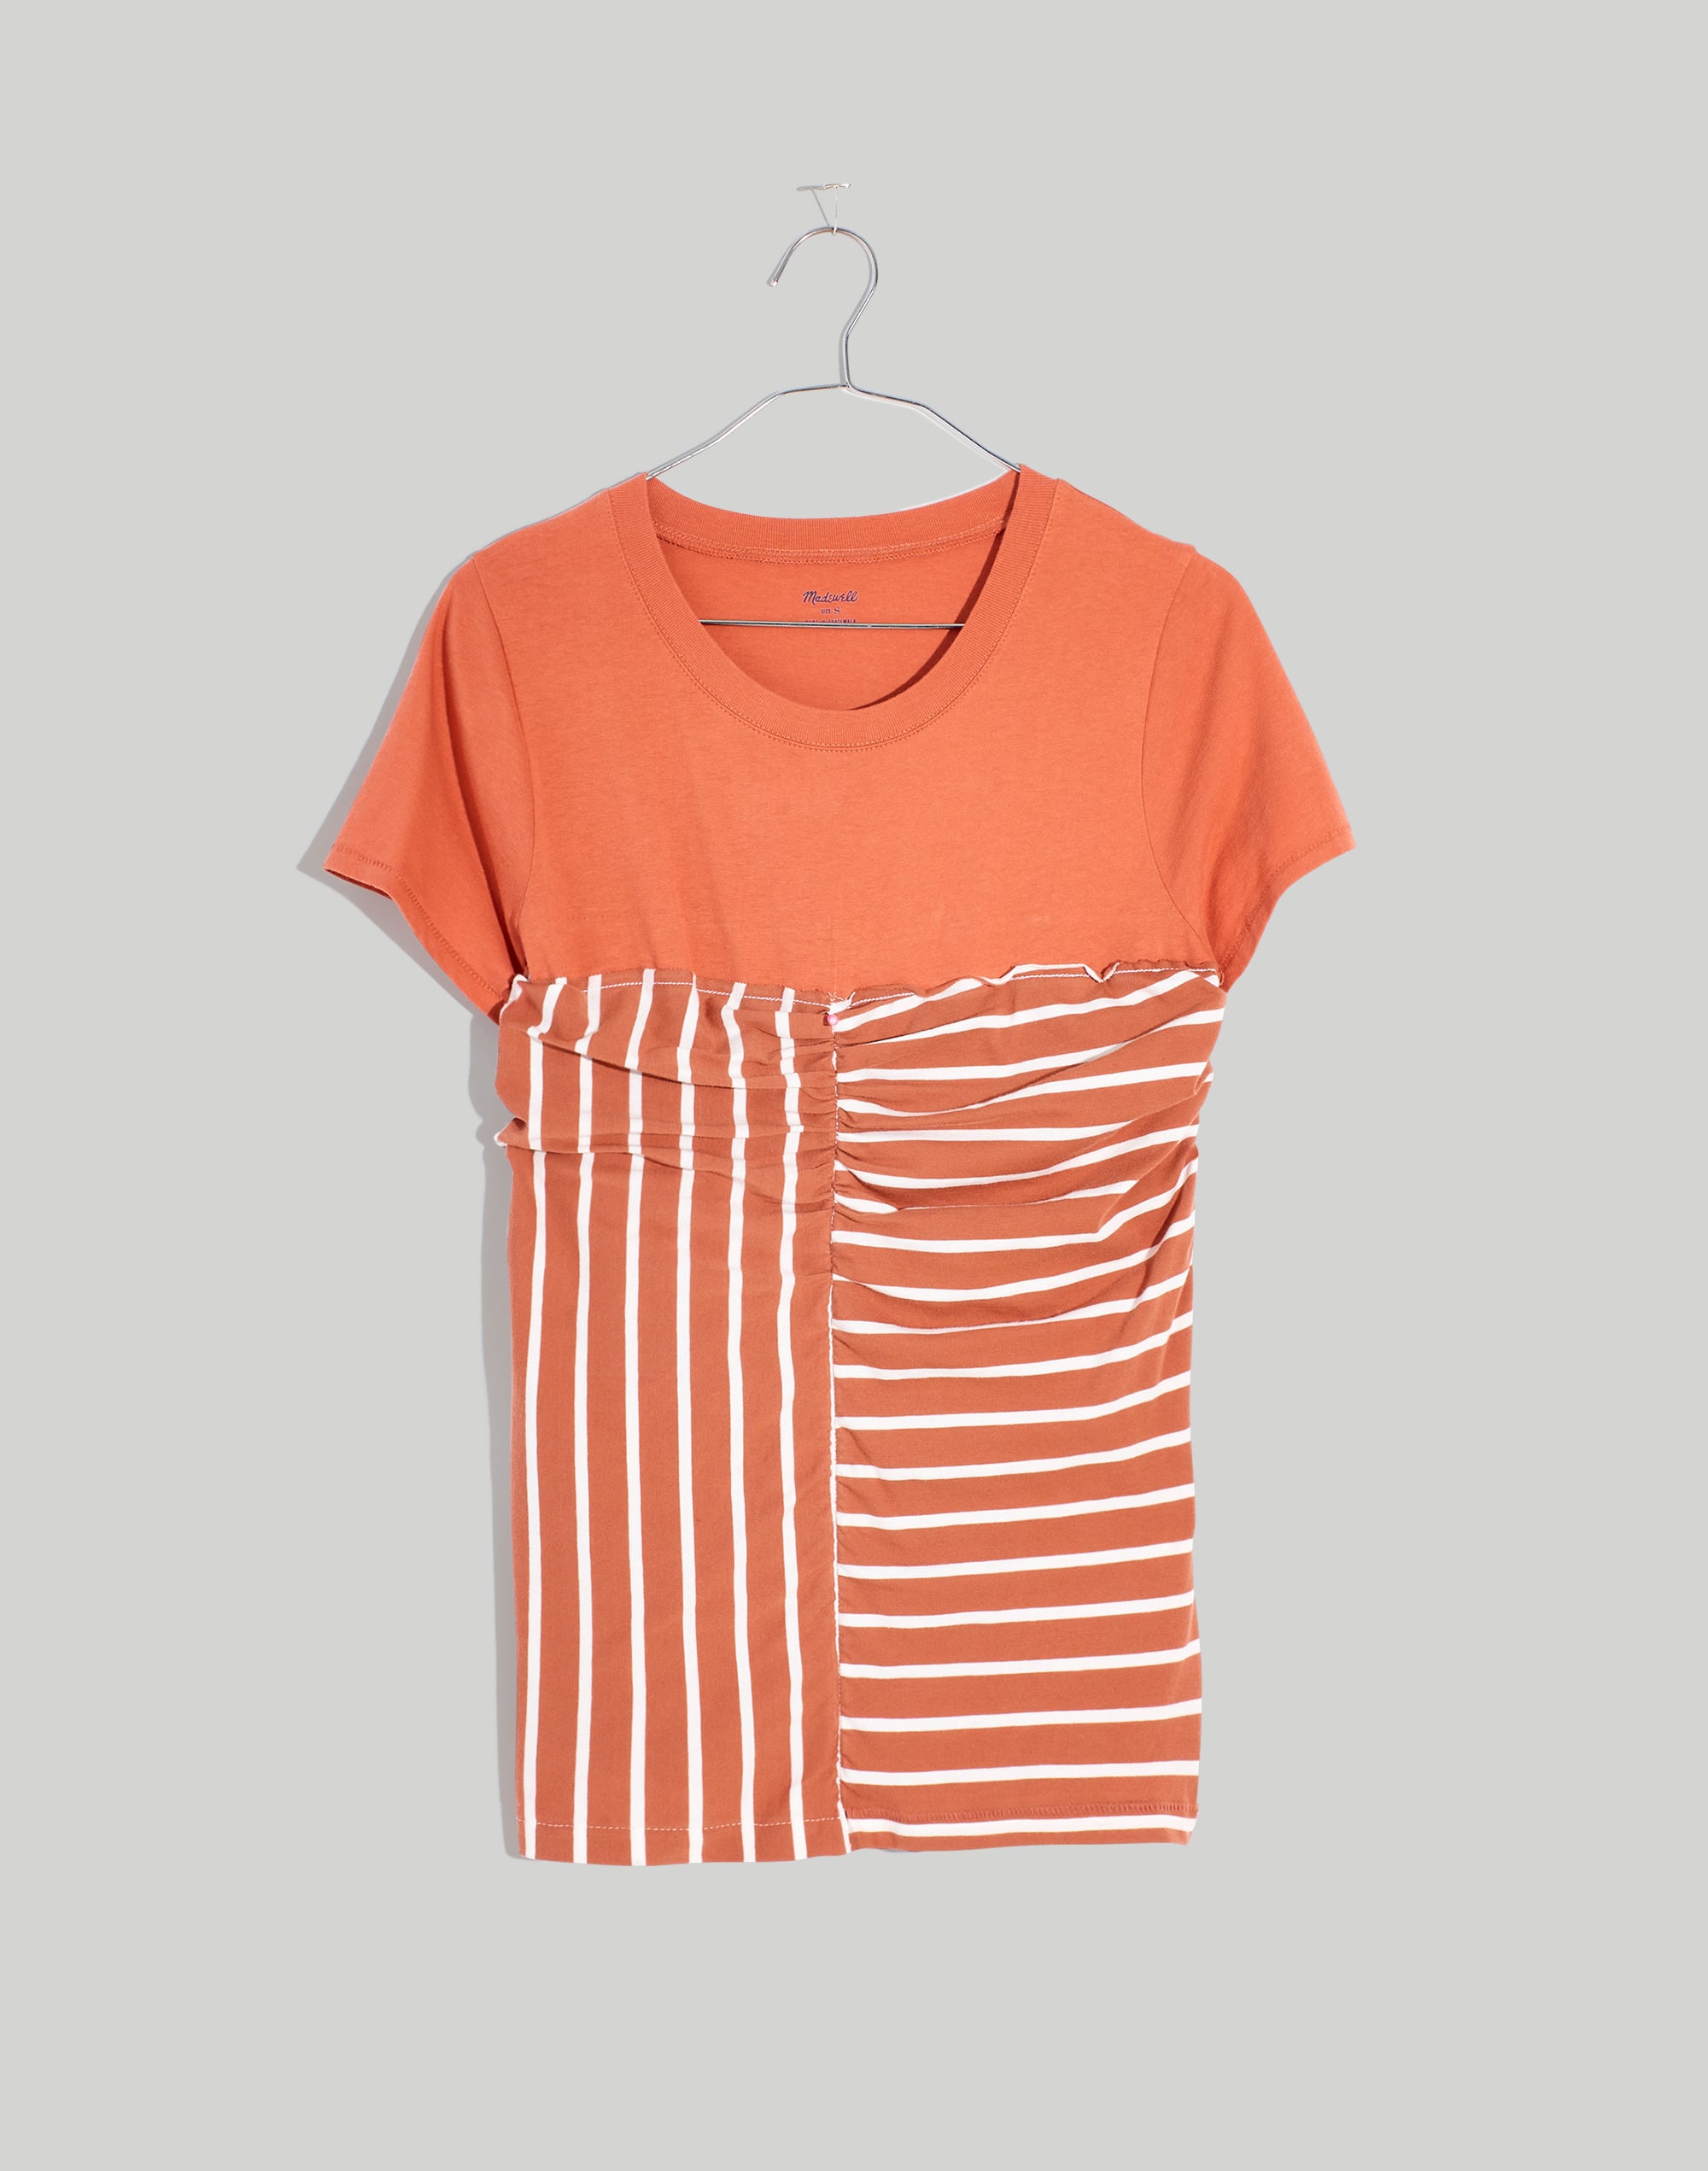 Madewell x Rentrayage Upcycled Ruched Tee